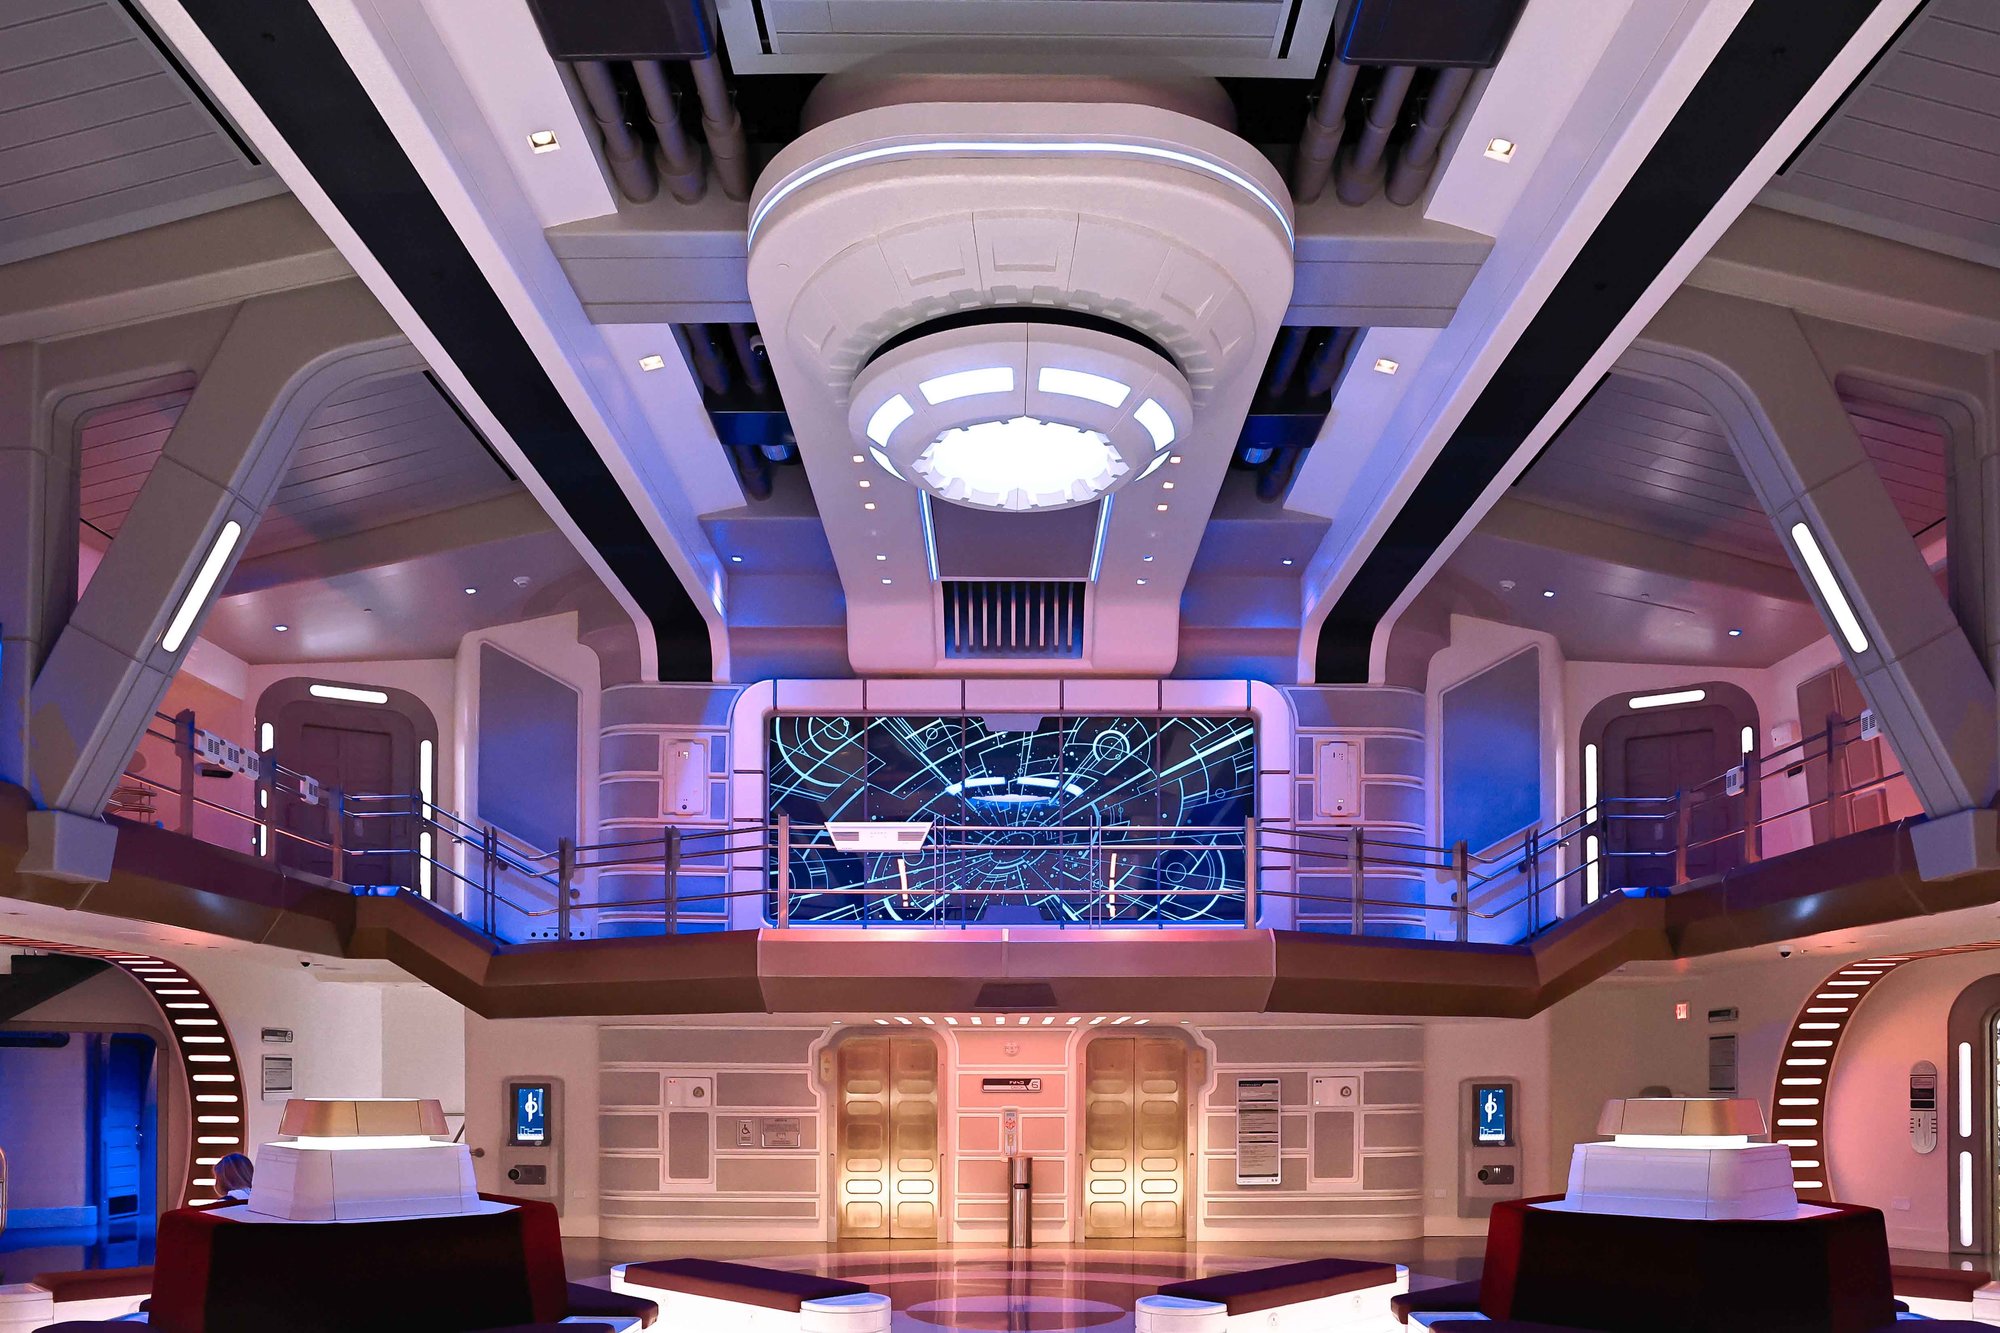 starcruiser lobby with white technological features and curved walls and doorways